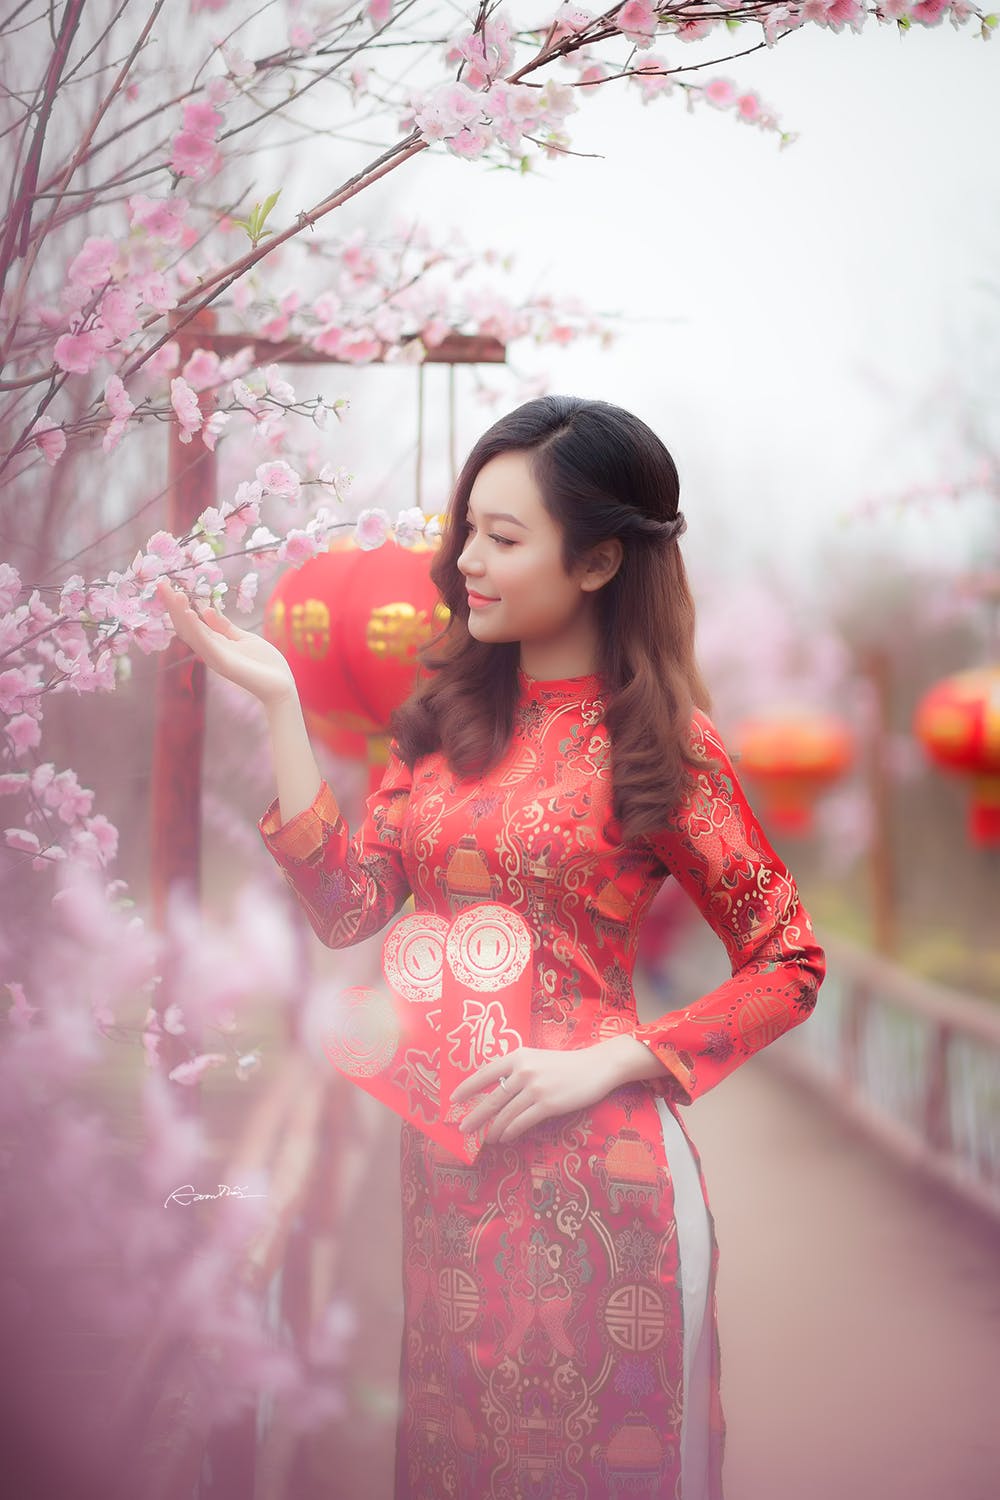 7 Important Flowers in Chinese Culture